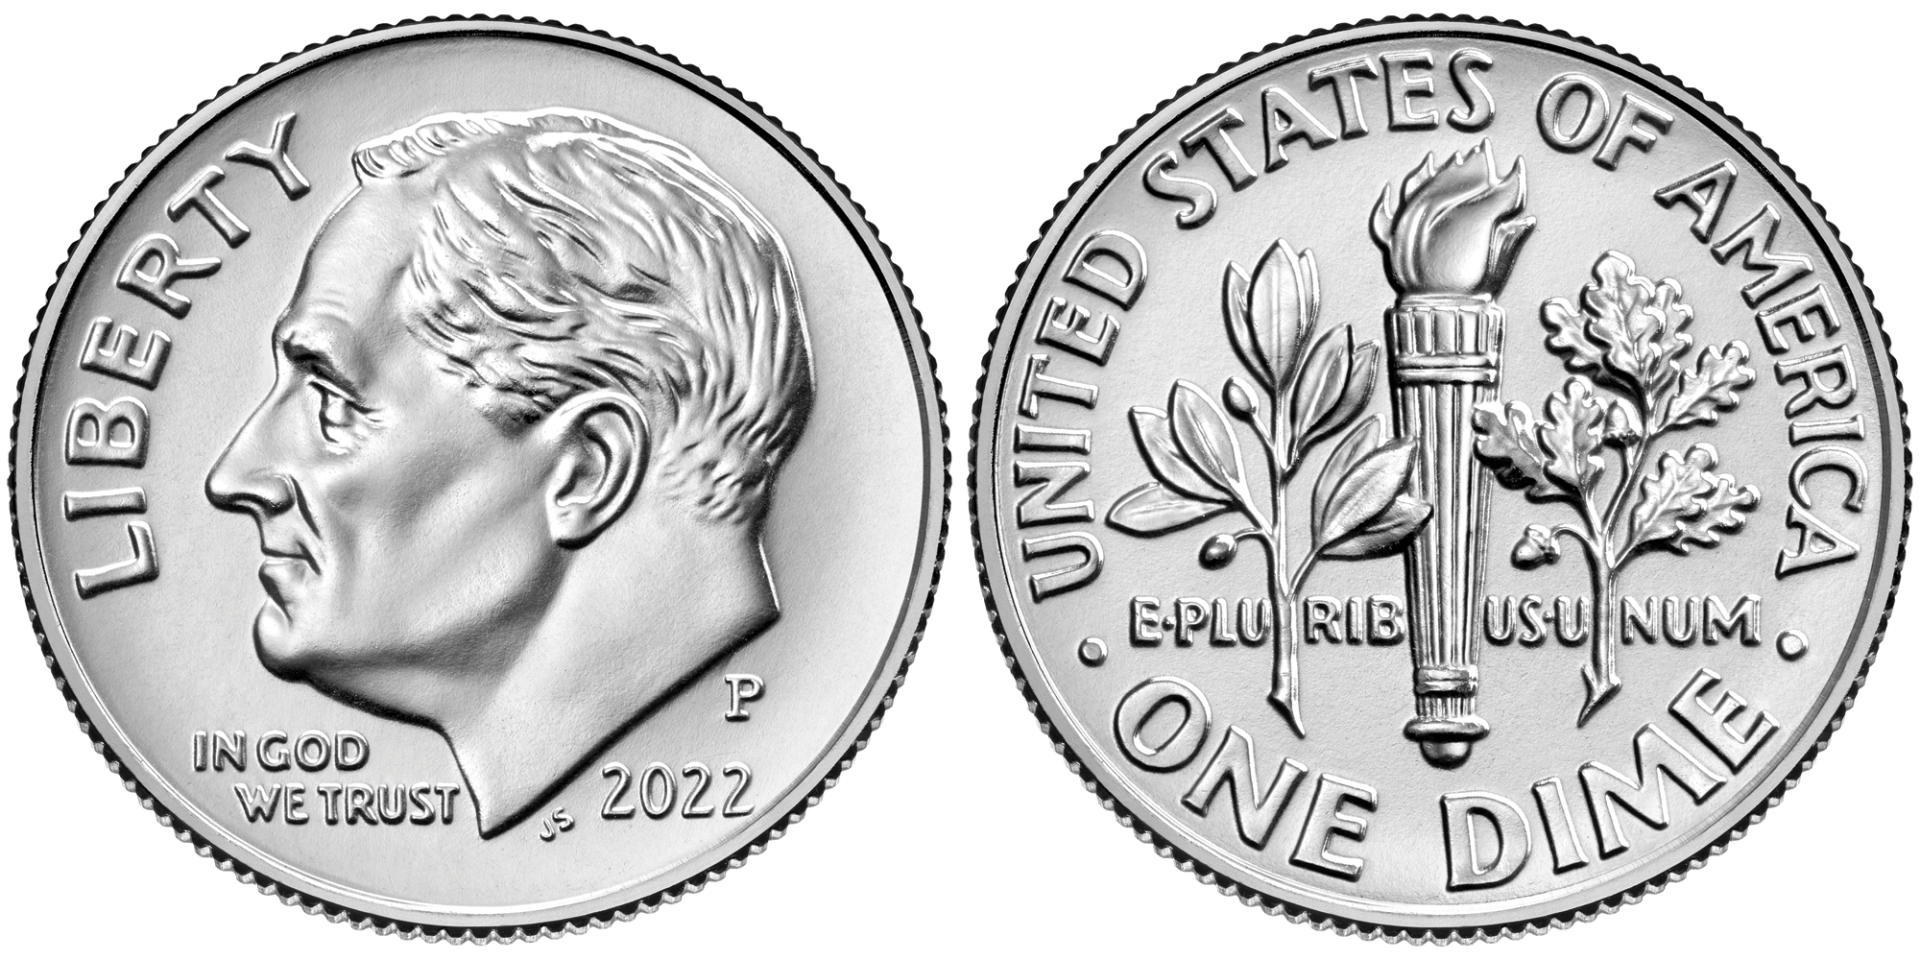 The obverse and reverse of a U.S. Dime